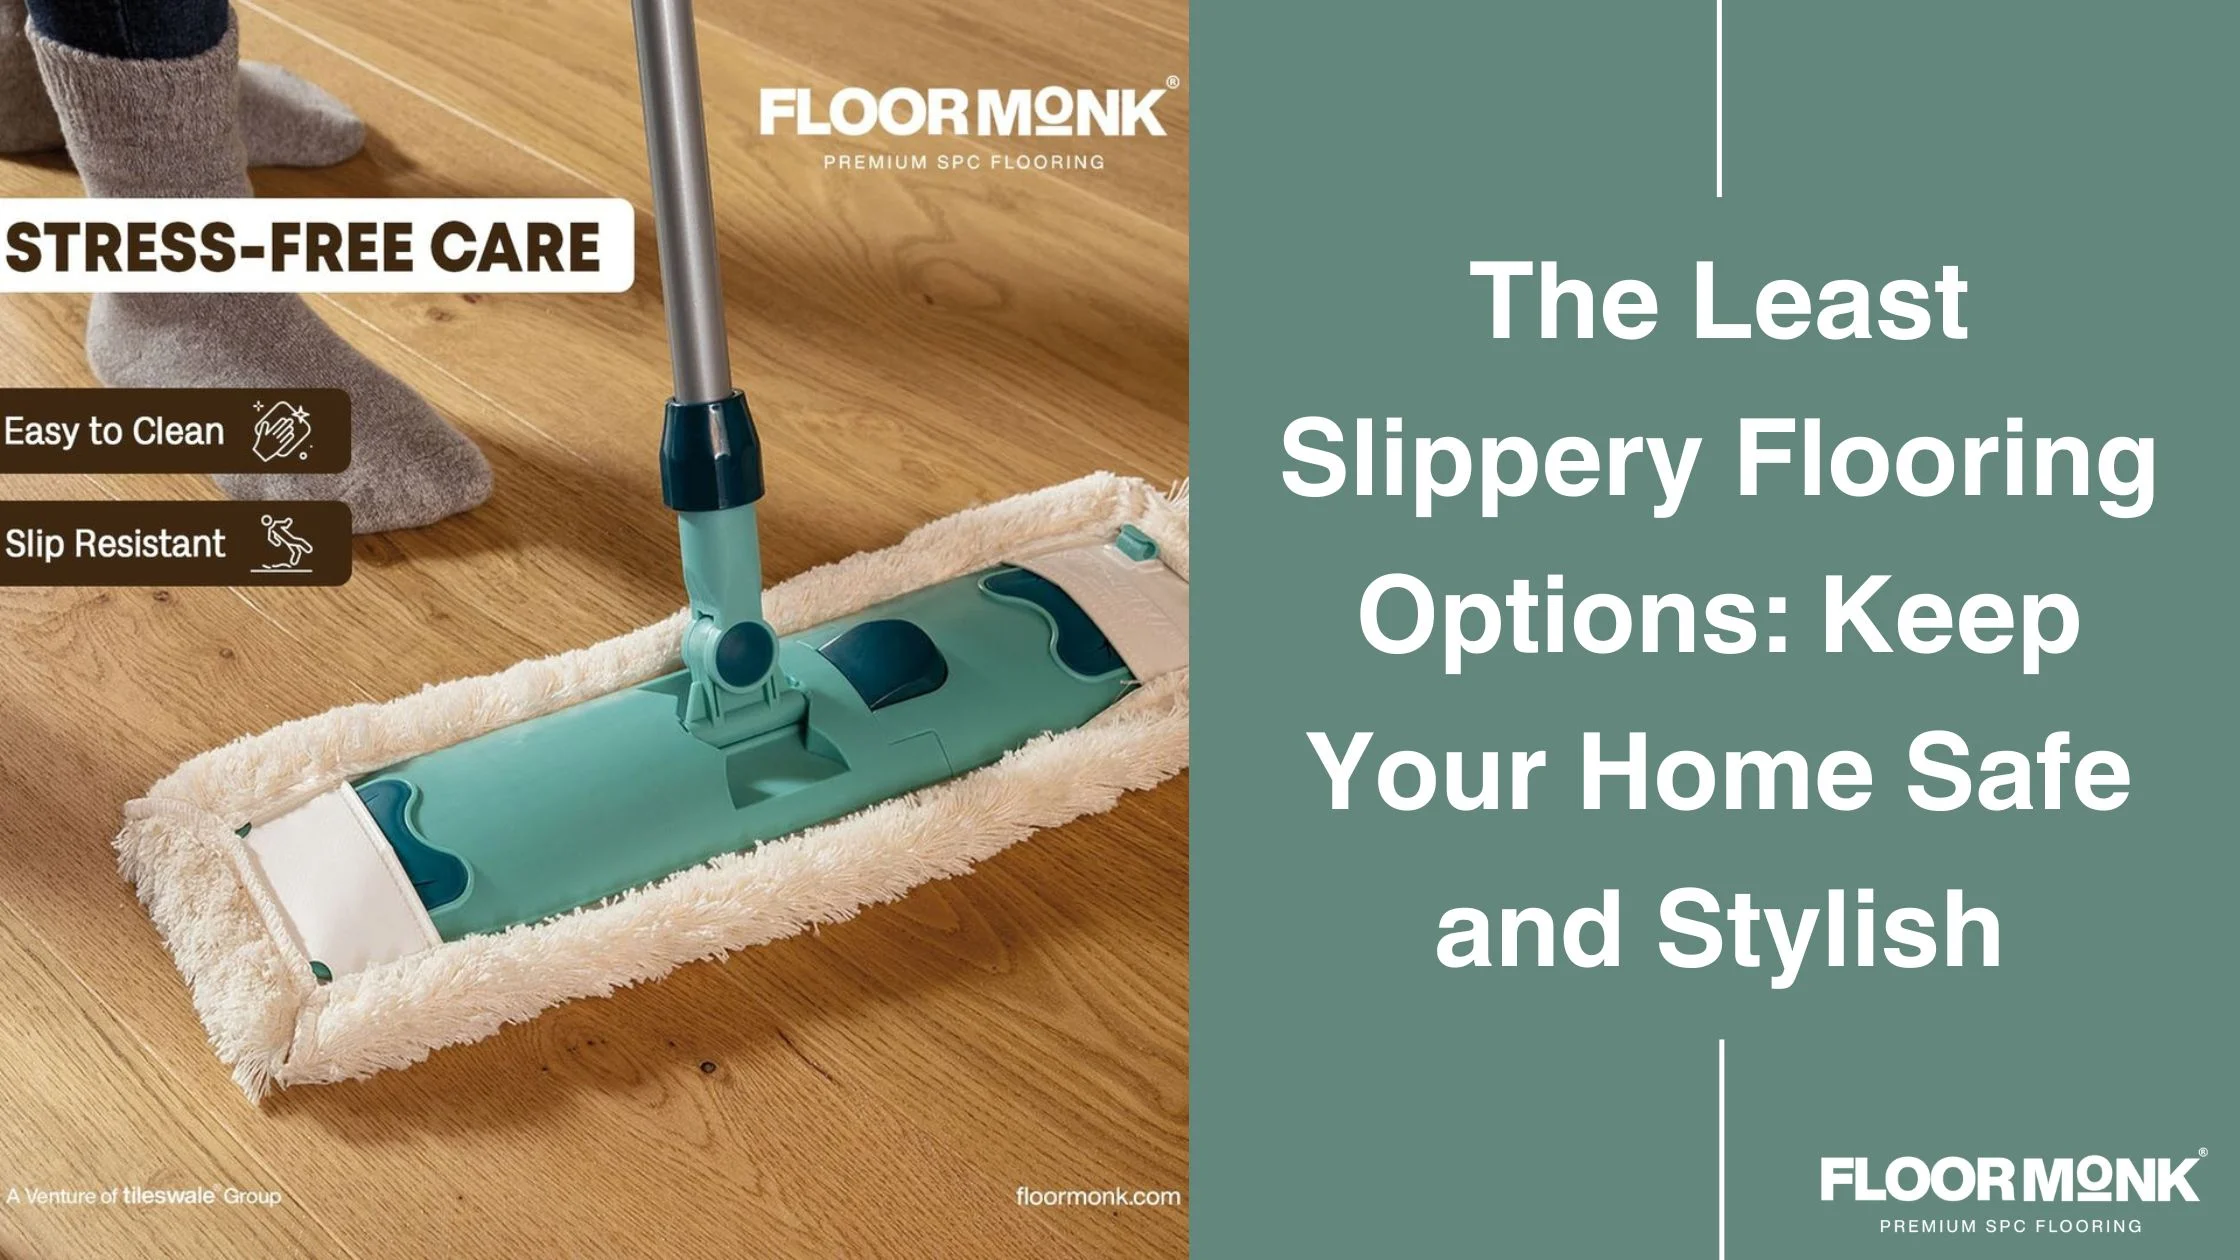 The Least Slippery Flooring Options: Keep Your Home Safe And Stylish